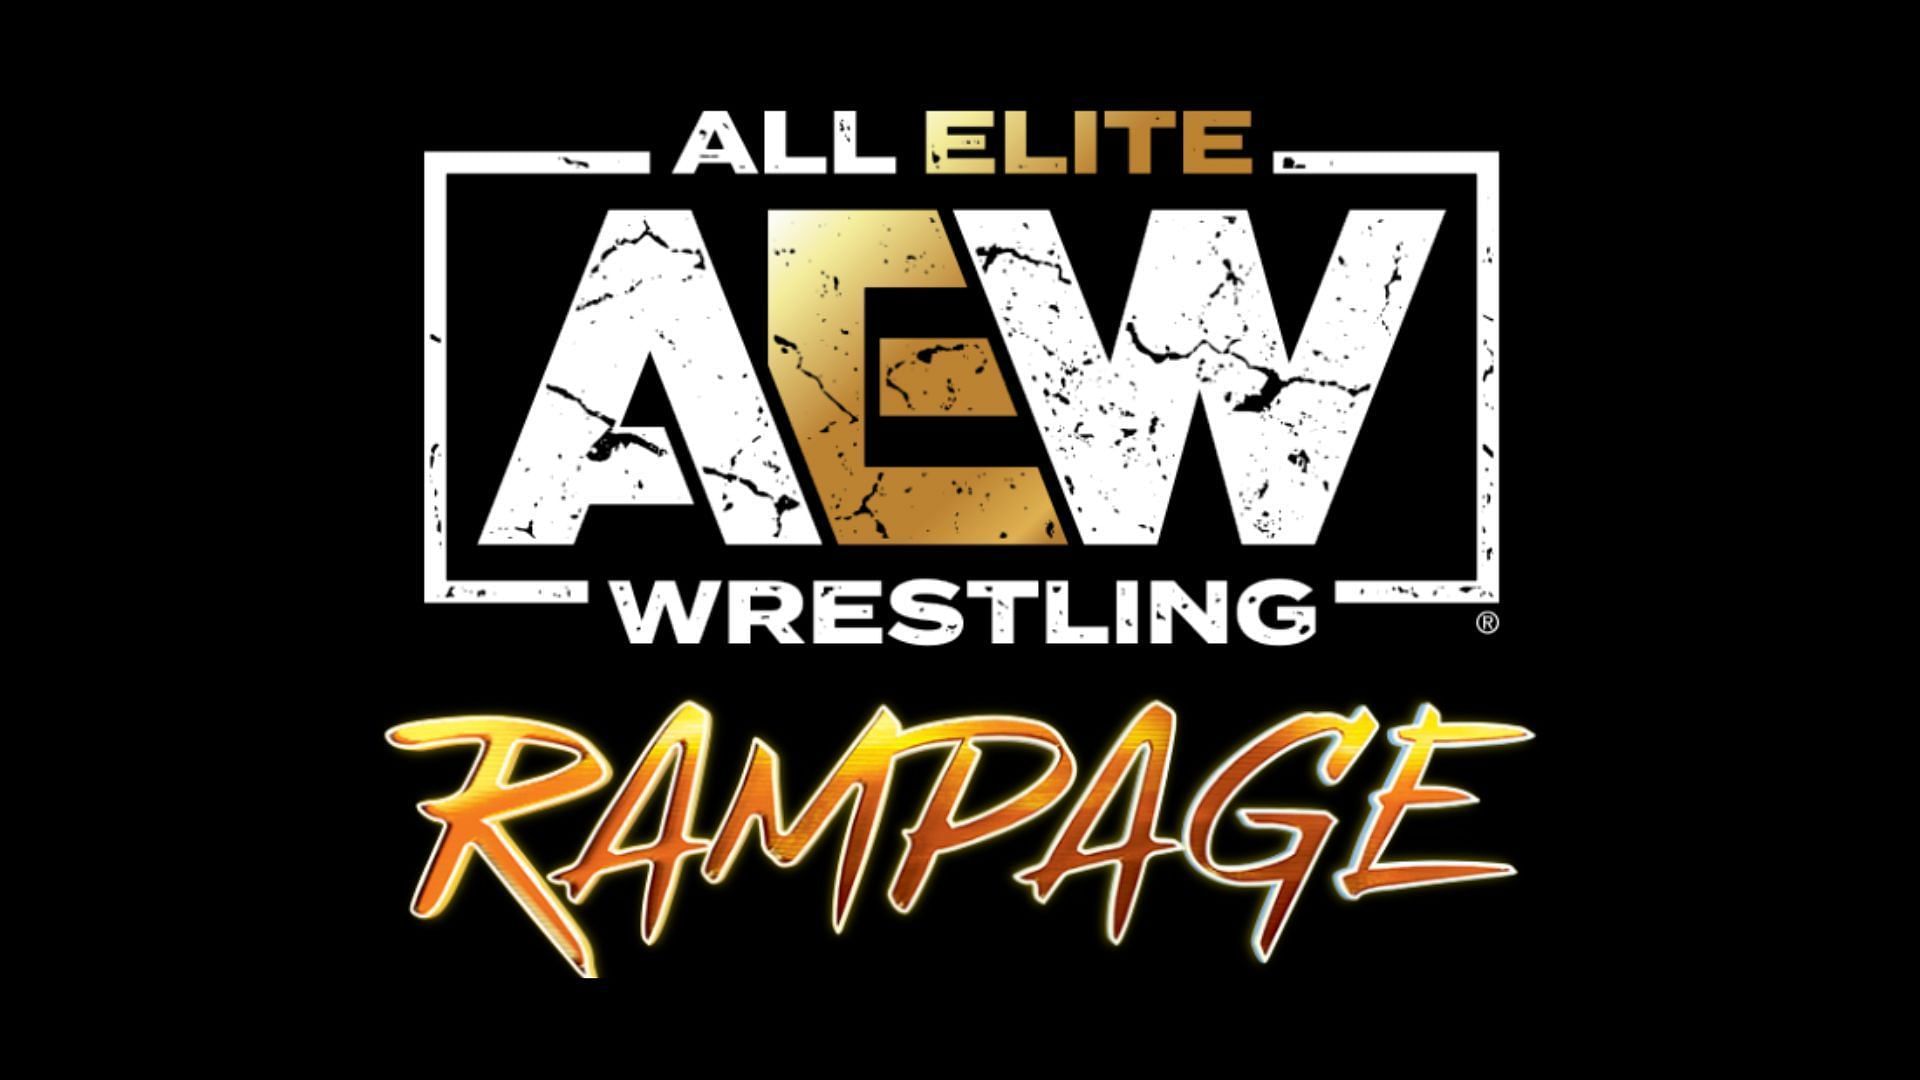 AEW Rampage airs every Friday.